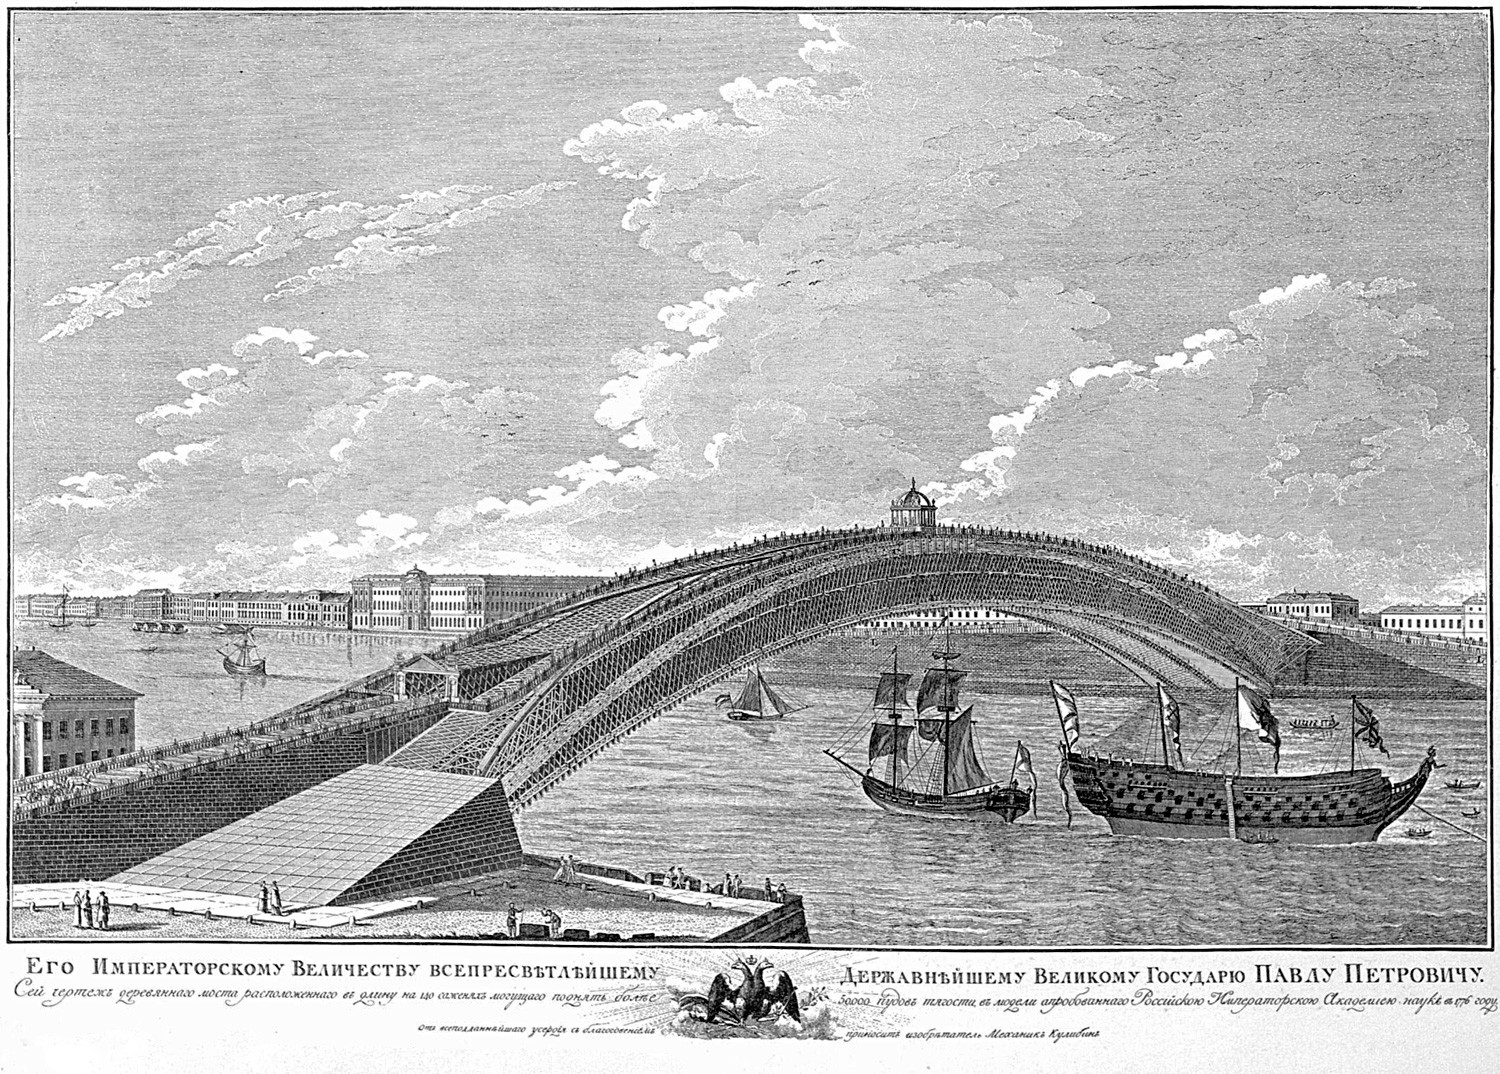 Proposed project of a bridge across the Neva River by Ivan Kulibin, 1776